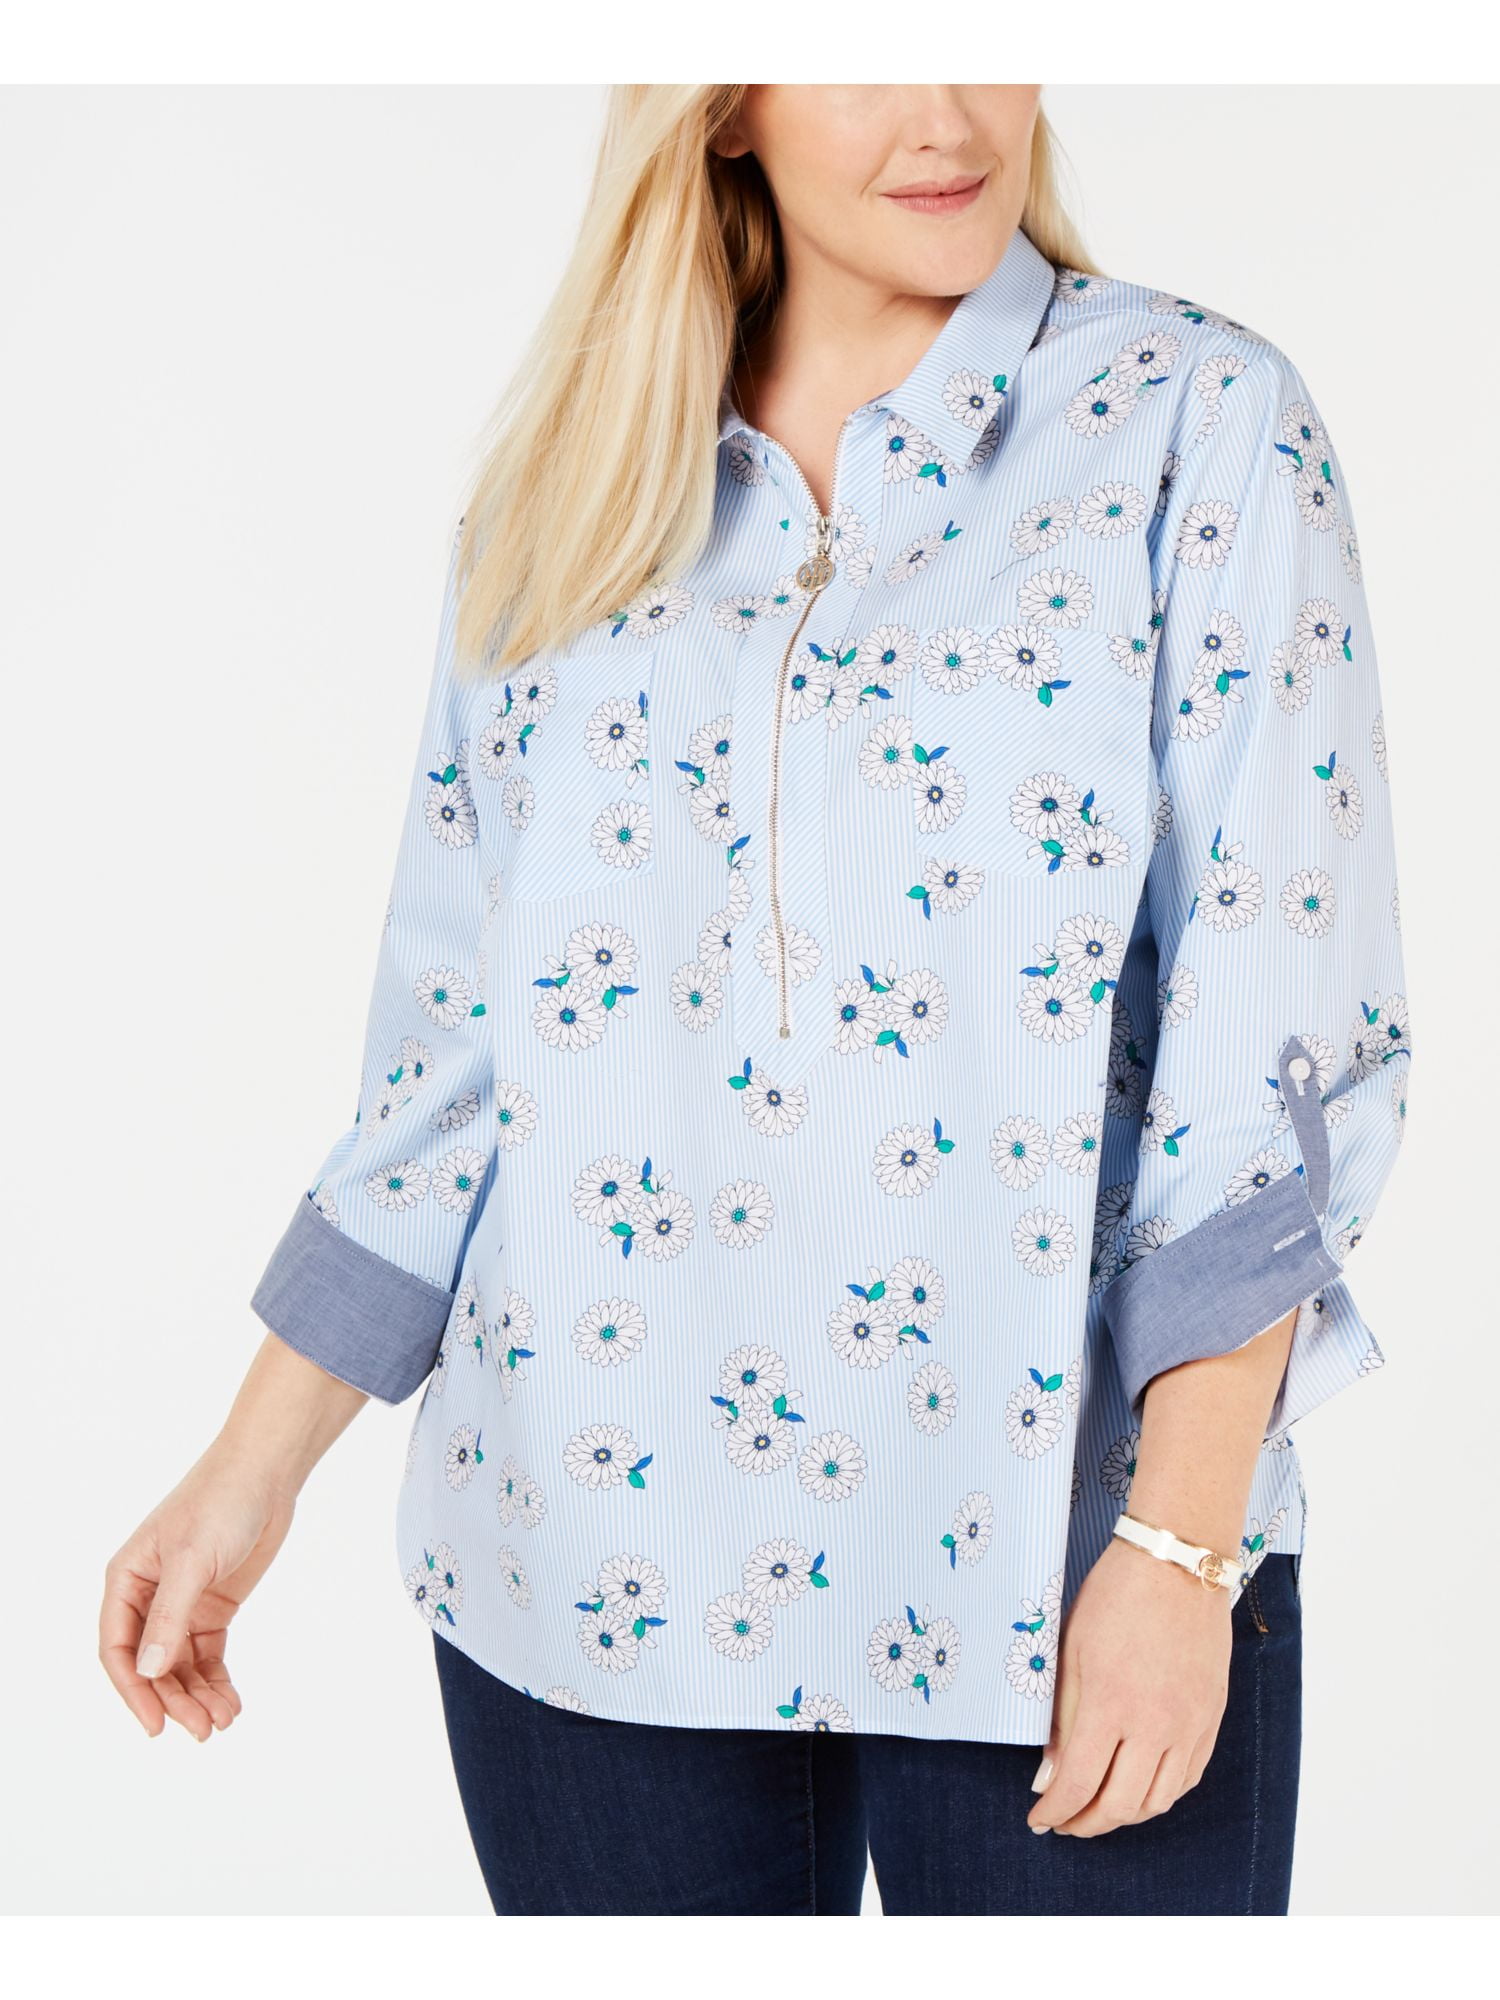 Leyben Womens Tunic Tops Plus Size Vintage Floral Button V-Neck 3/4 Sleeve Casual Baggy Flowy Cotton Blouse Shirts